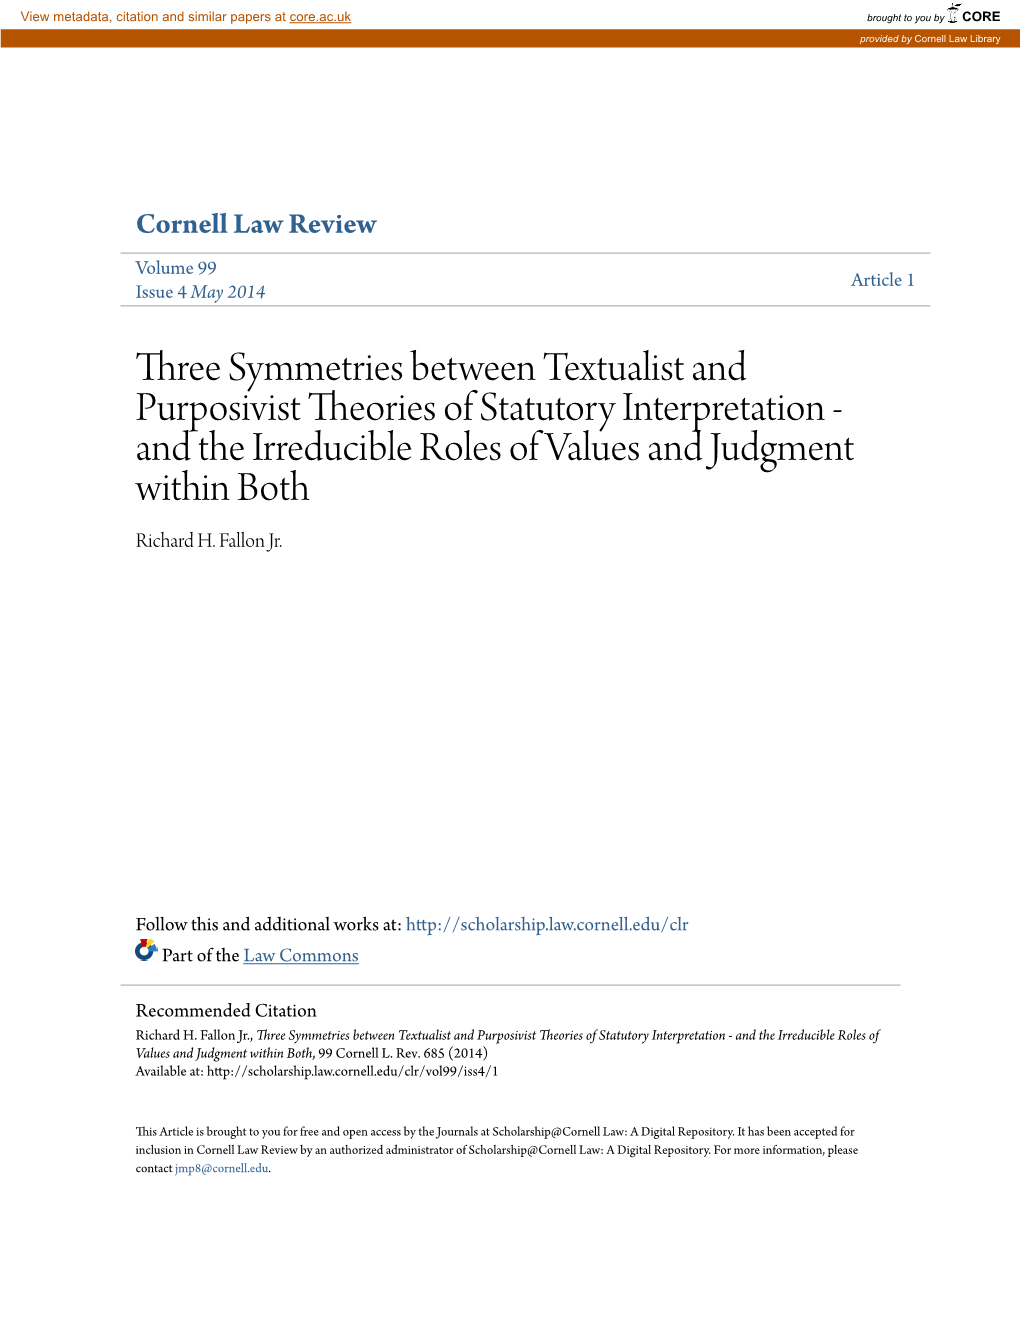 Three Symmetries Between Textualist and Purposivist Theories of Statutory Interpretation - and the Irreducible Roles of Values and Judgment Within Both Richard H